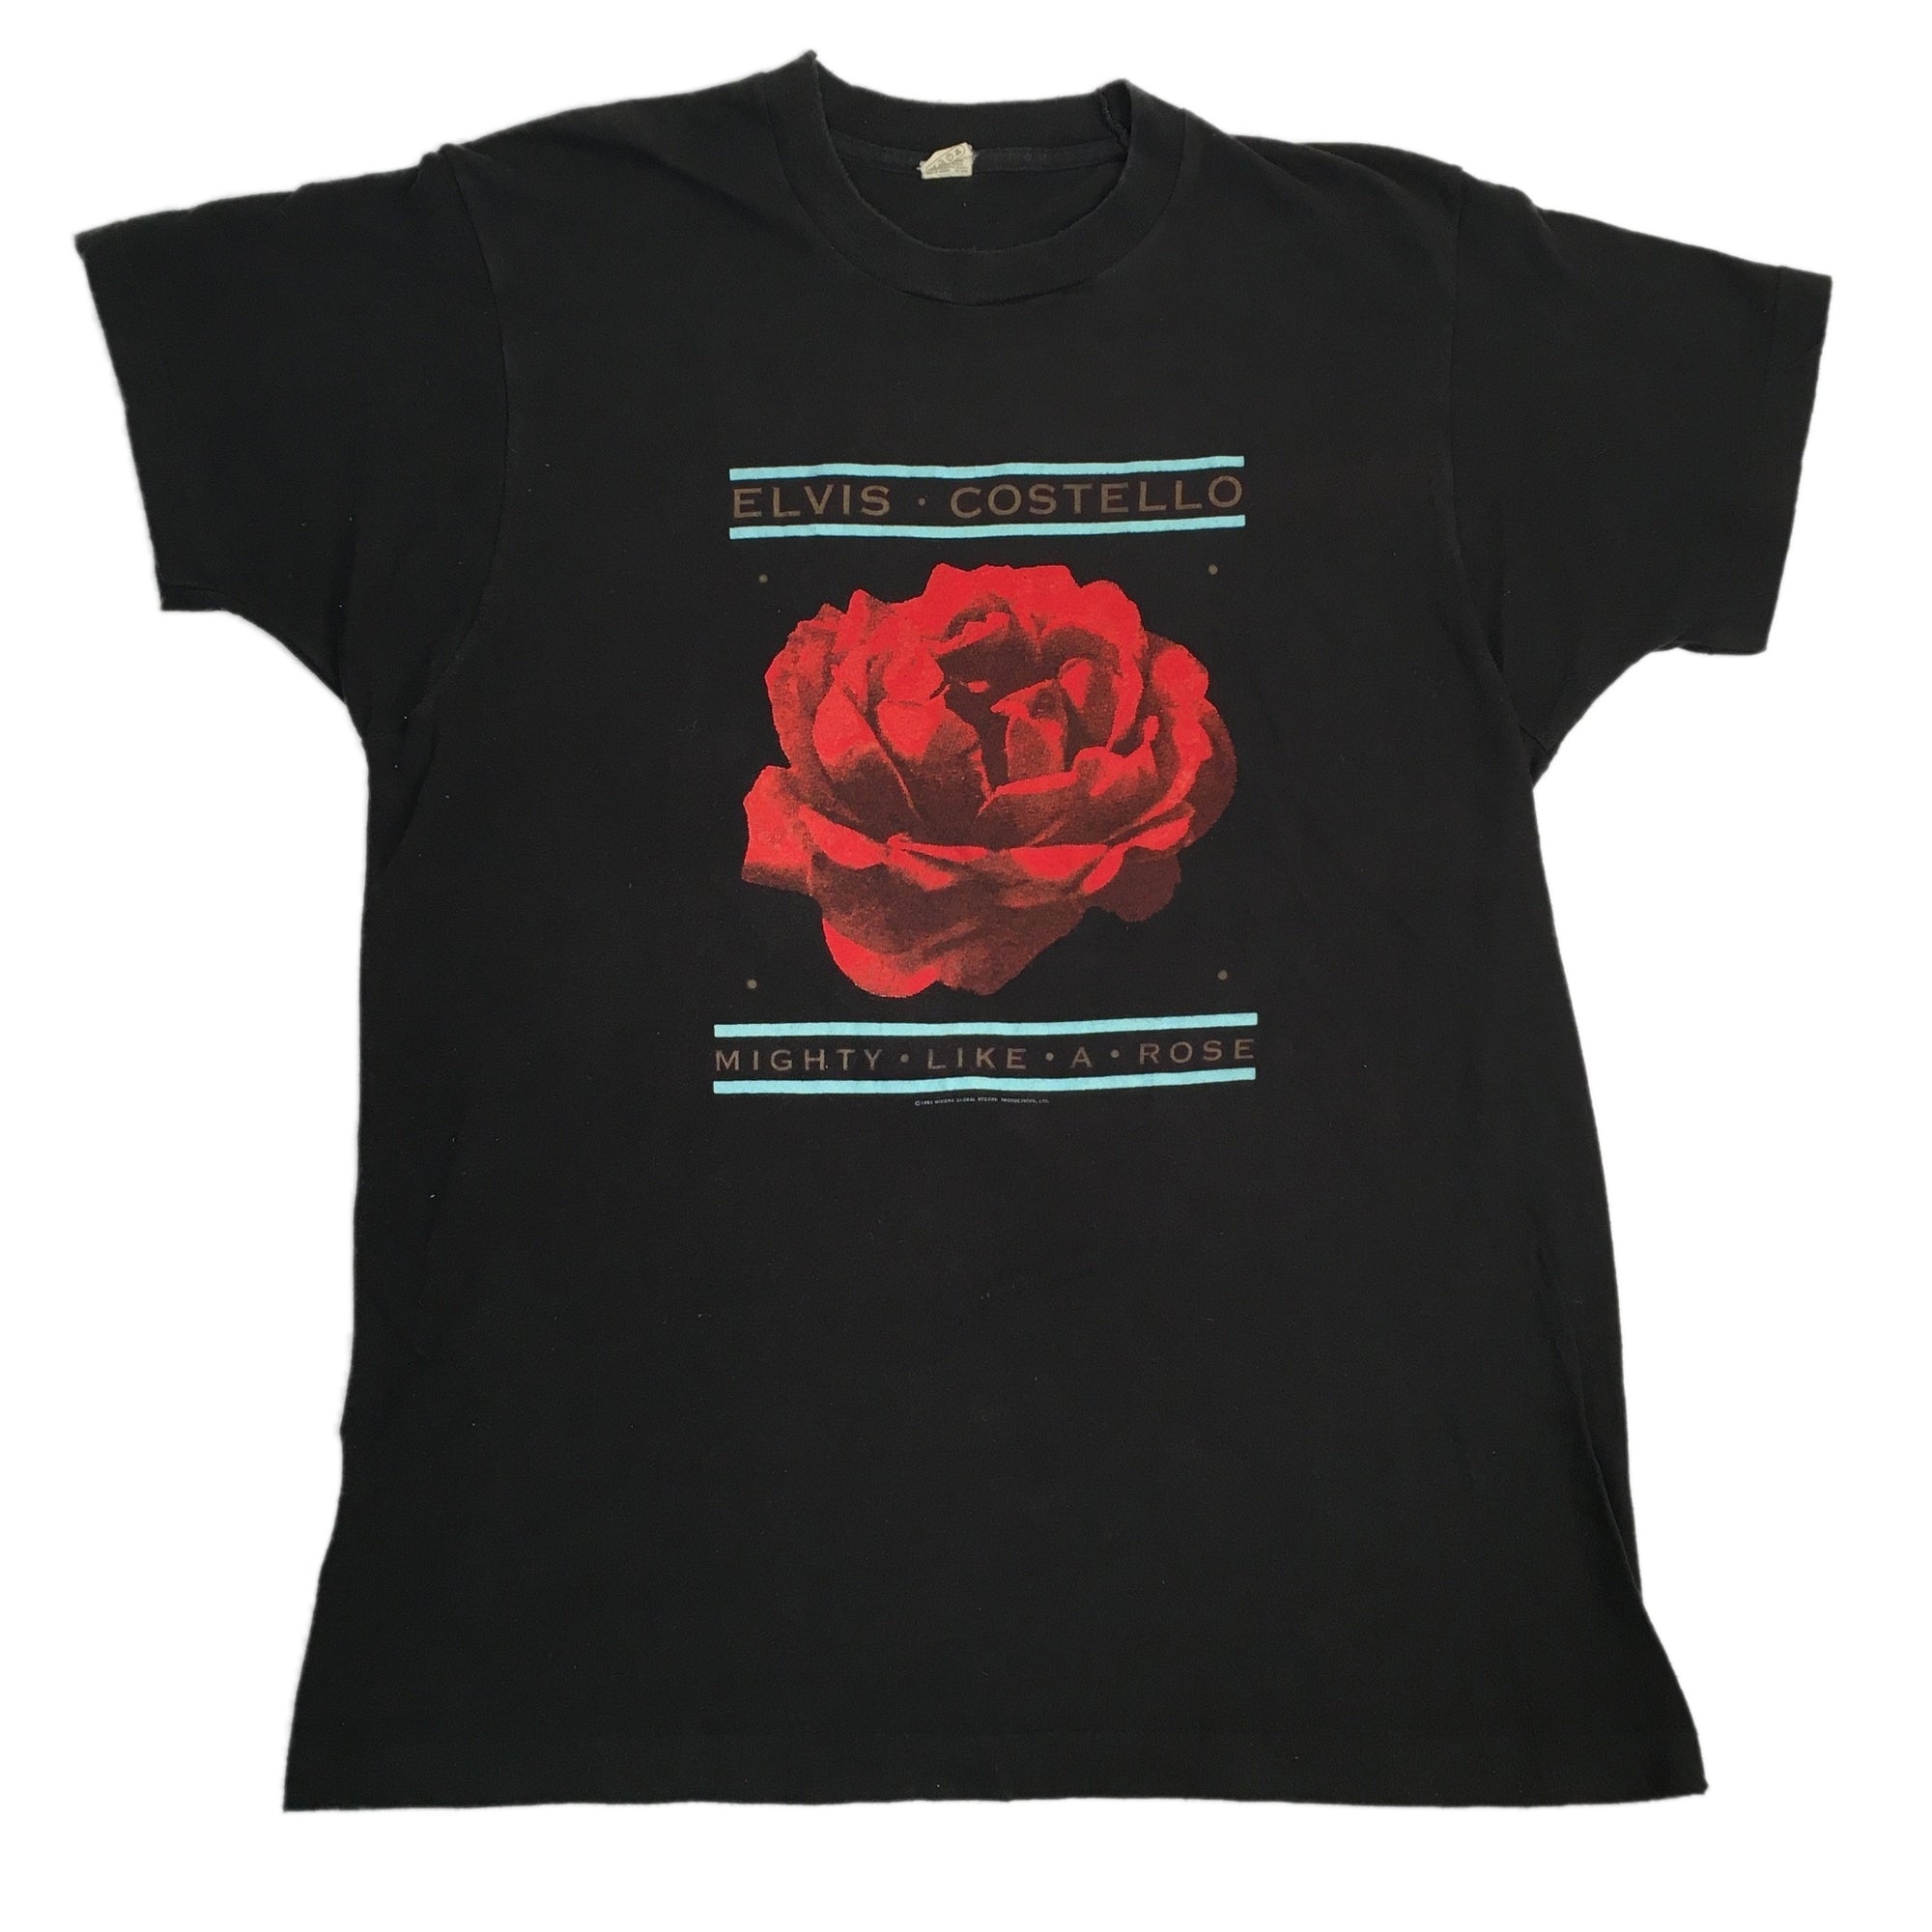 Vintage Elvis Costello "Mighty Like A Rose" T-Shirt - jointcustodydc